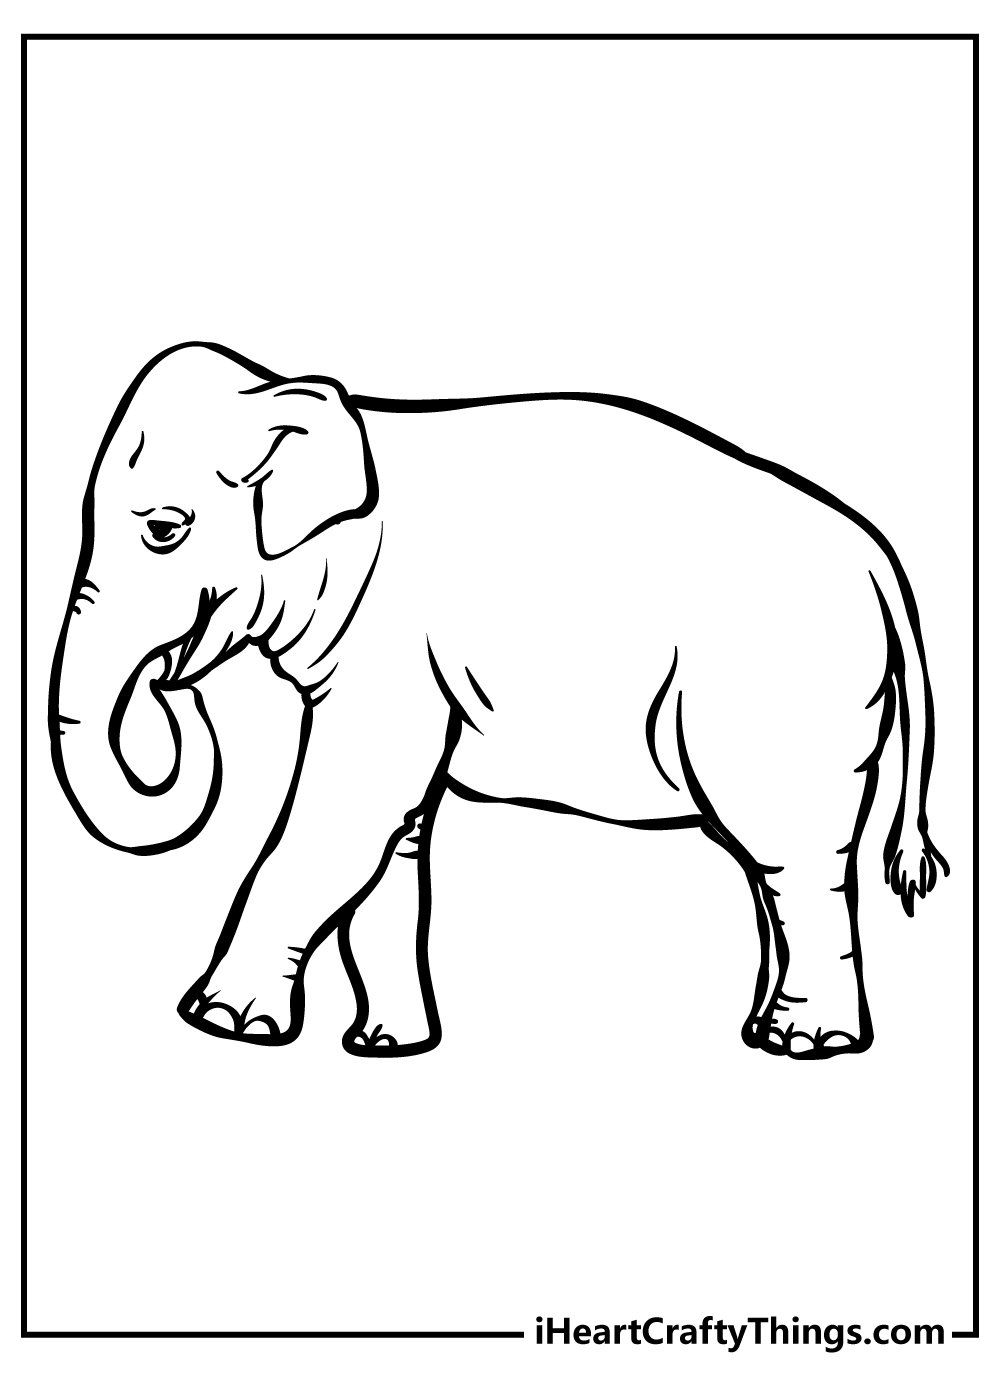 Elephant coloring pages free printables